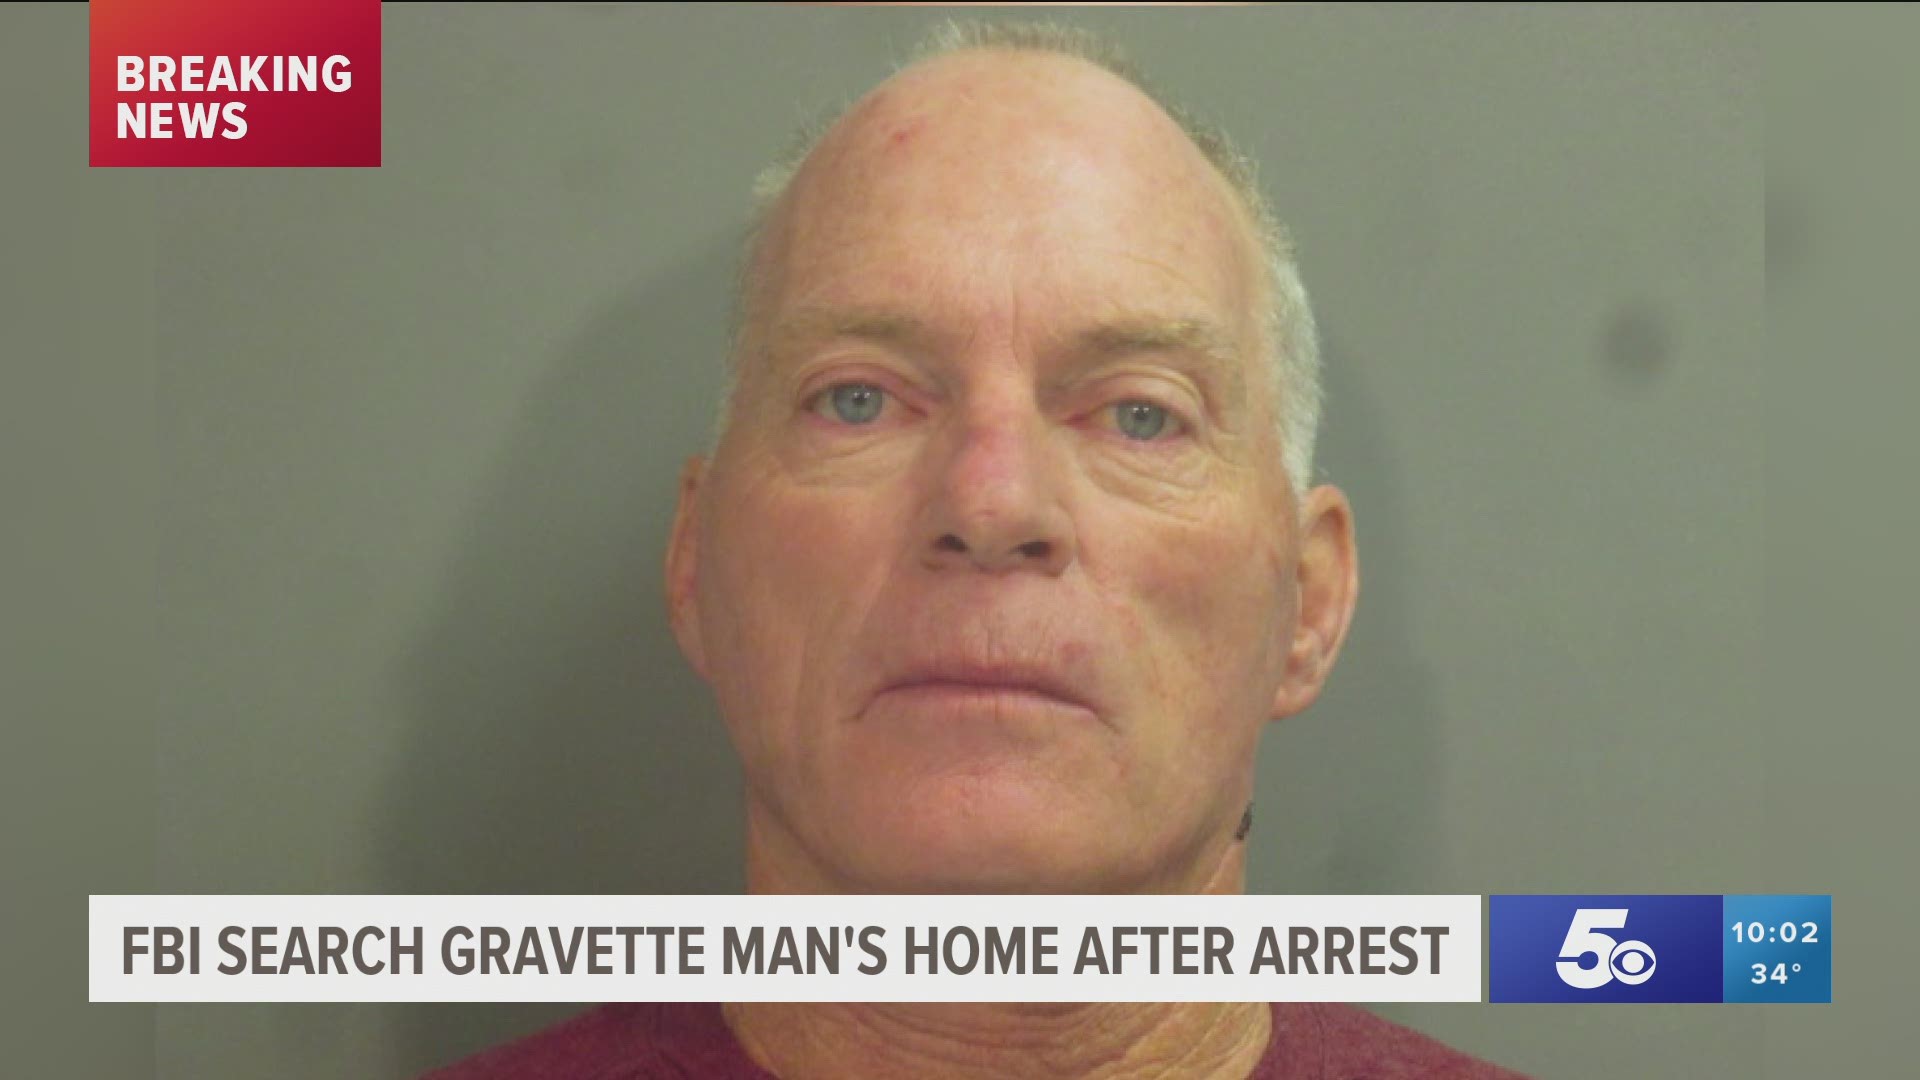 The FBI searched Barnett's home in Gravette on Friday following his arrest. https://bit.ly/39hNEgb